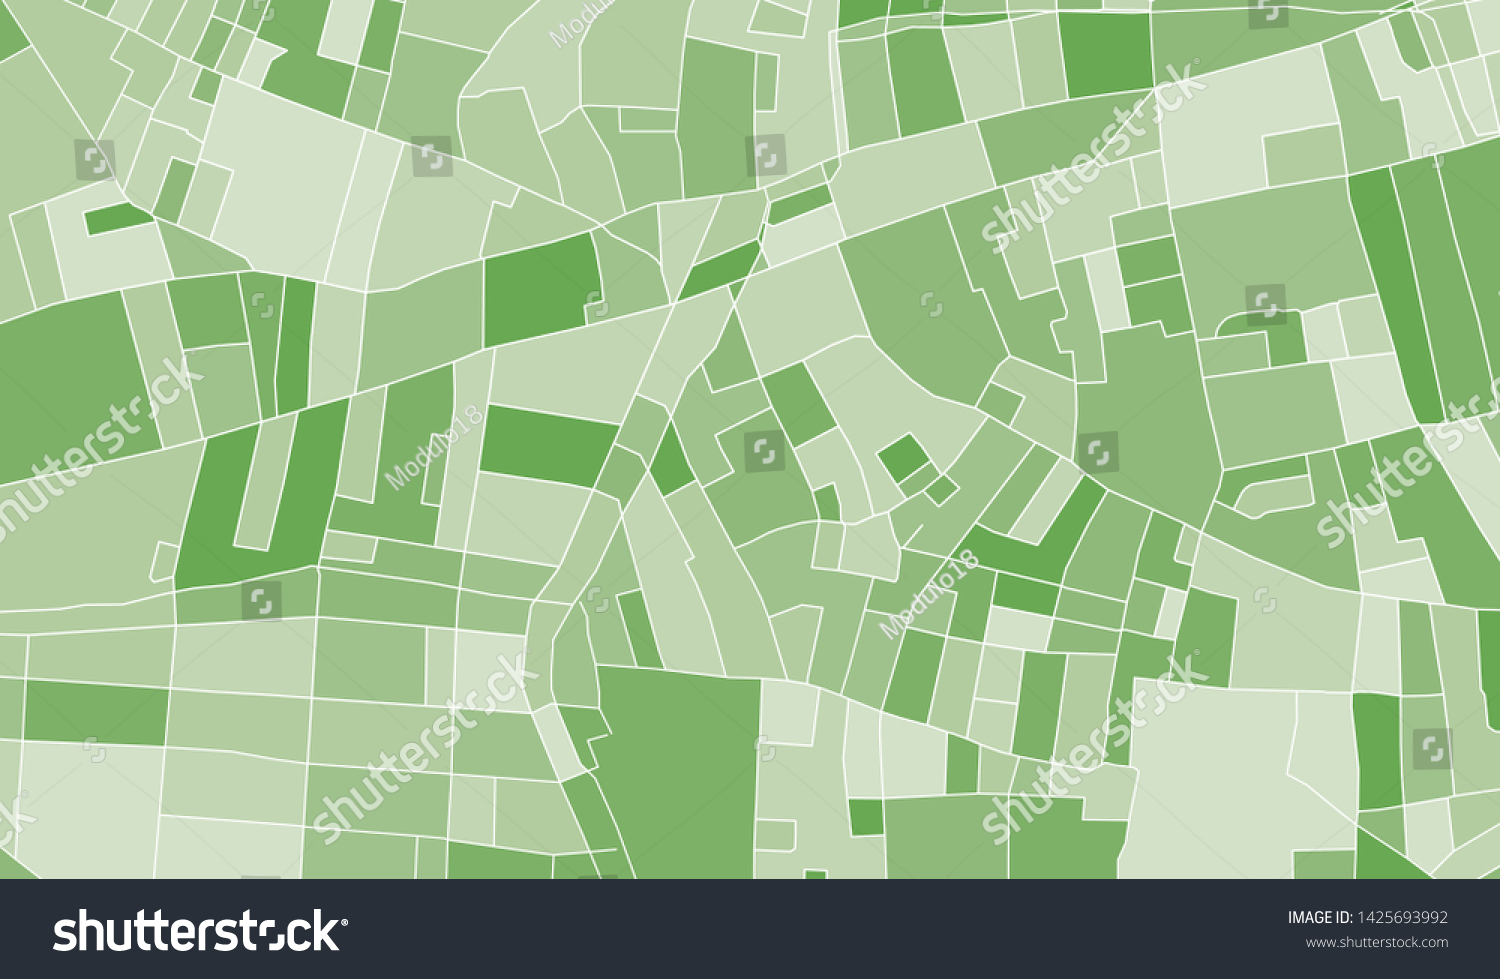 illustration green field block from aerial view #1425693992